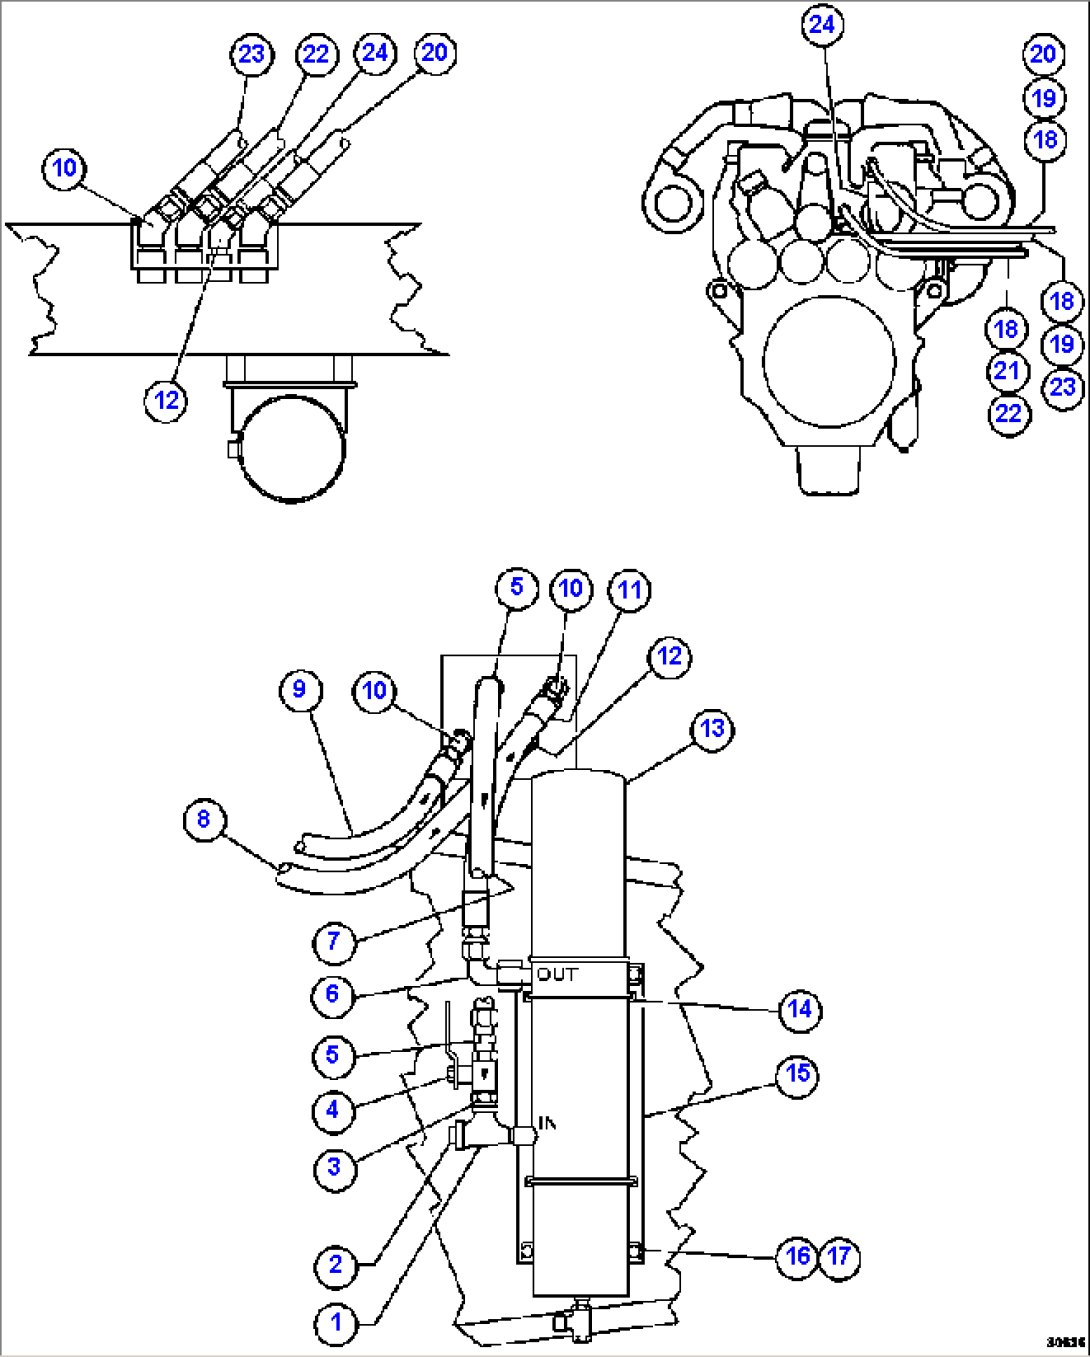 FUEL FILTER PIPING